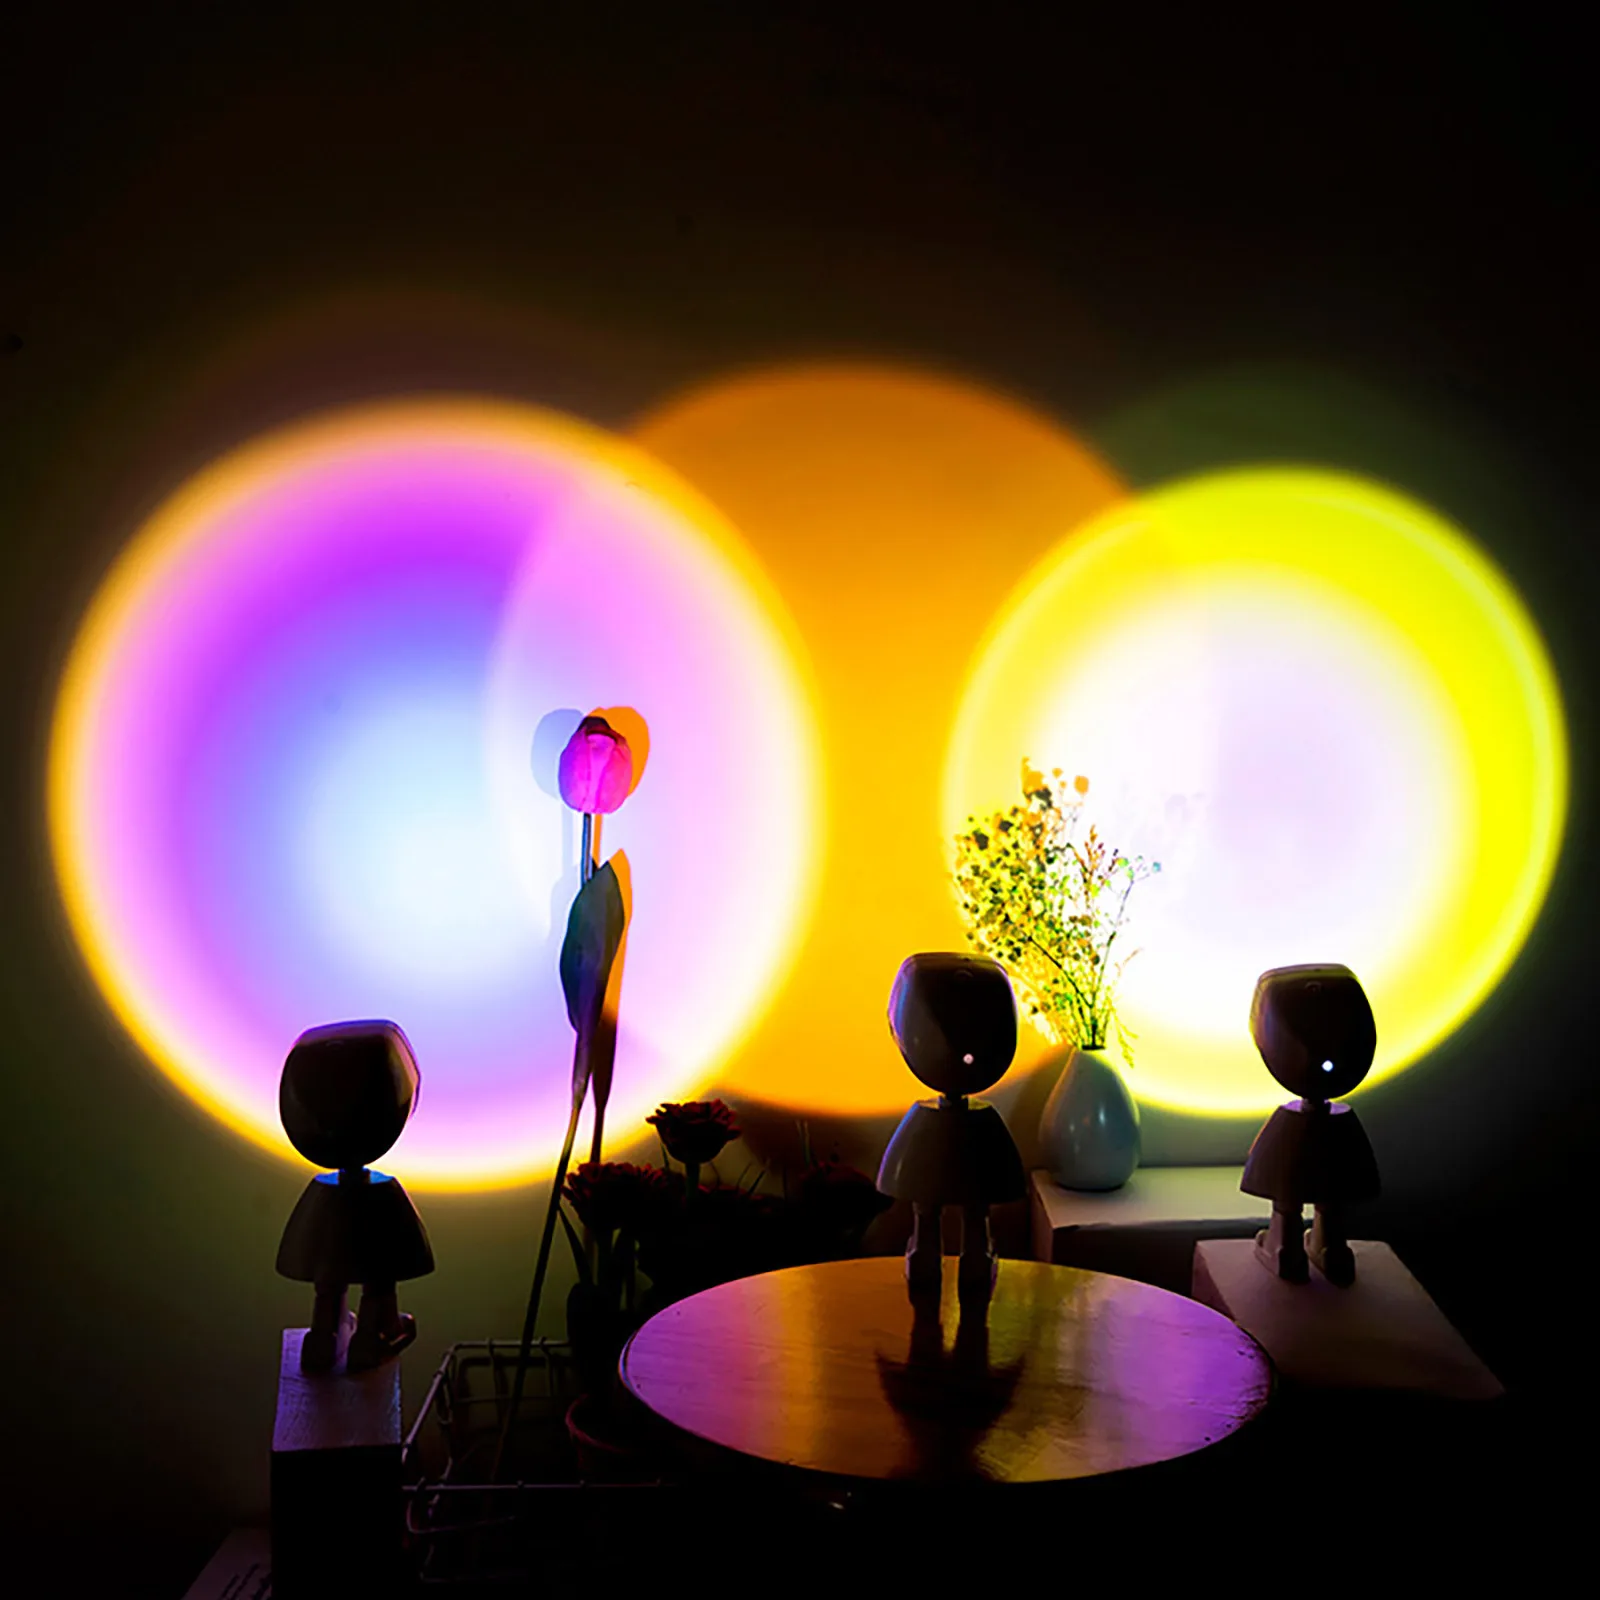 

Atmosphere Led Night Light Rainbow Sunset Projection Light USB Operate Table Lamp Home Coffe shop Background Wall Lamp D26